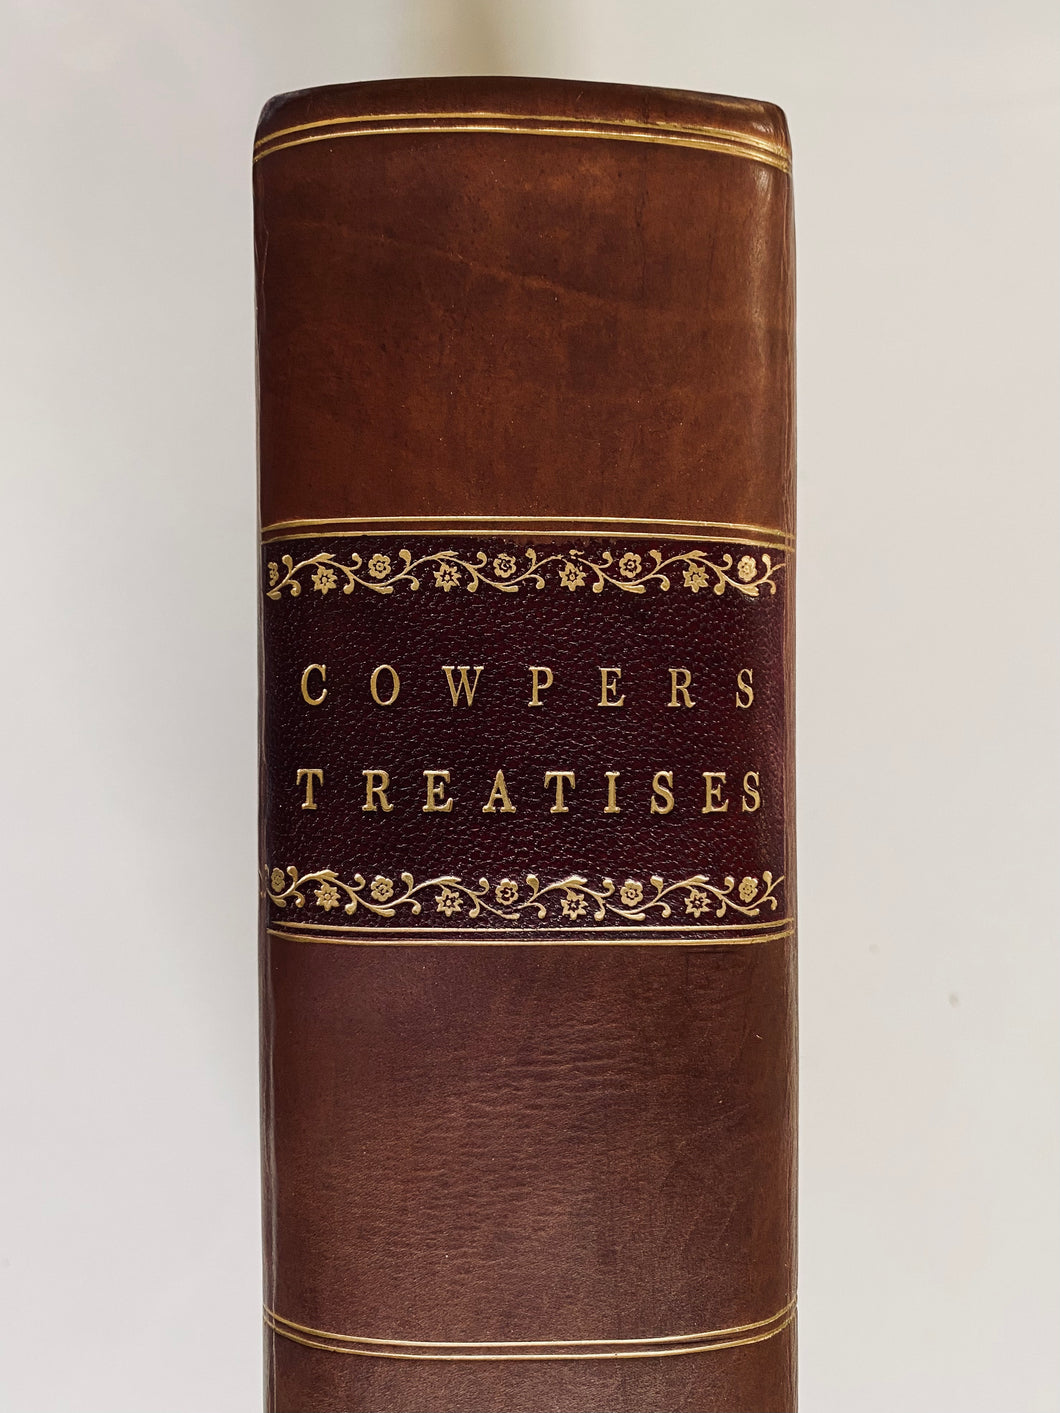 1623 WILLIAM COWPER. 1100 Page Folio of the Works of an Important Scottish Puritan!